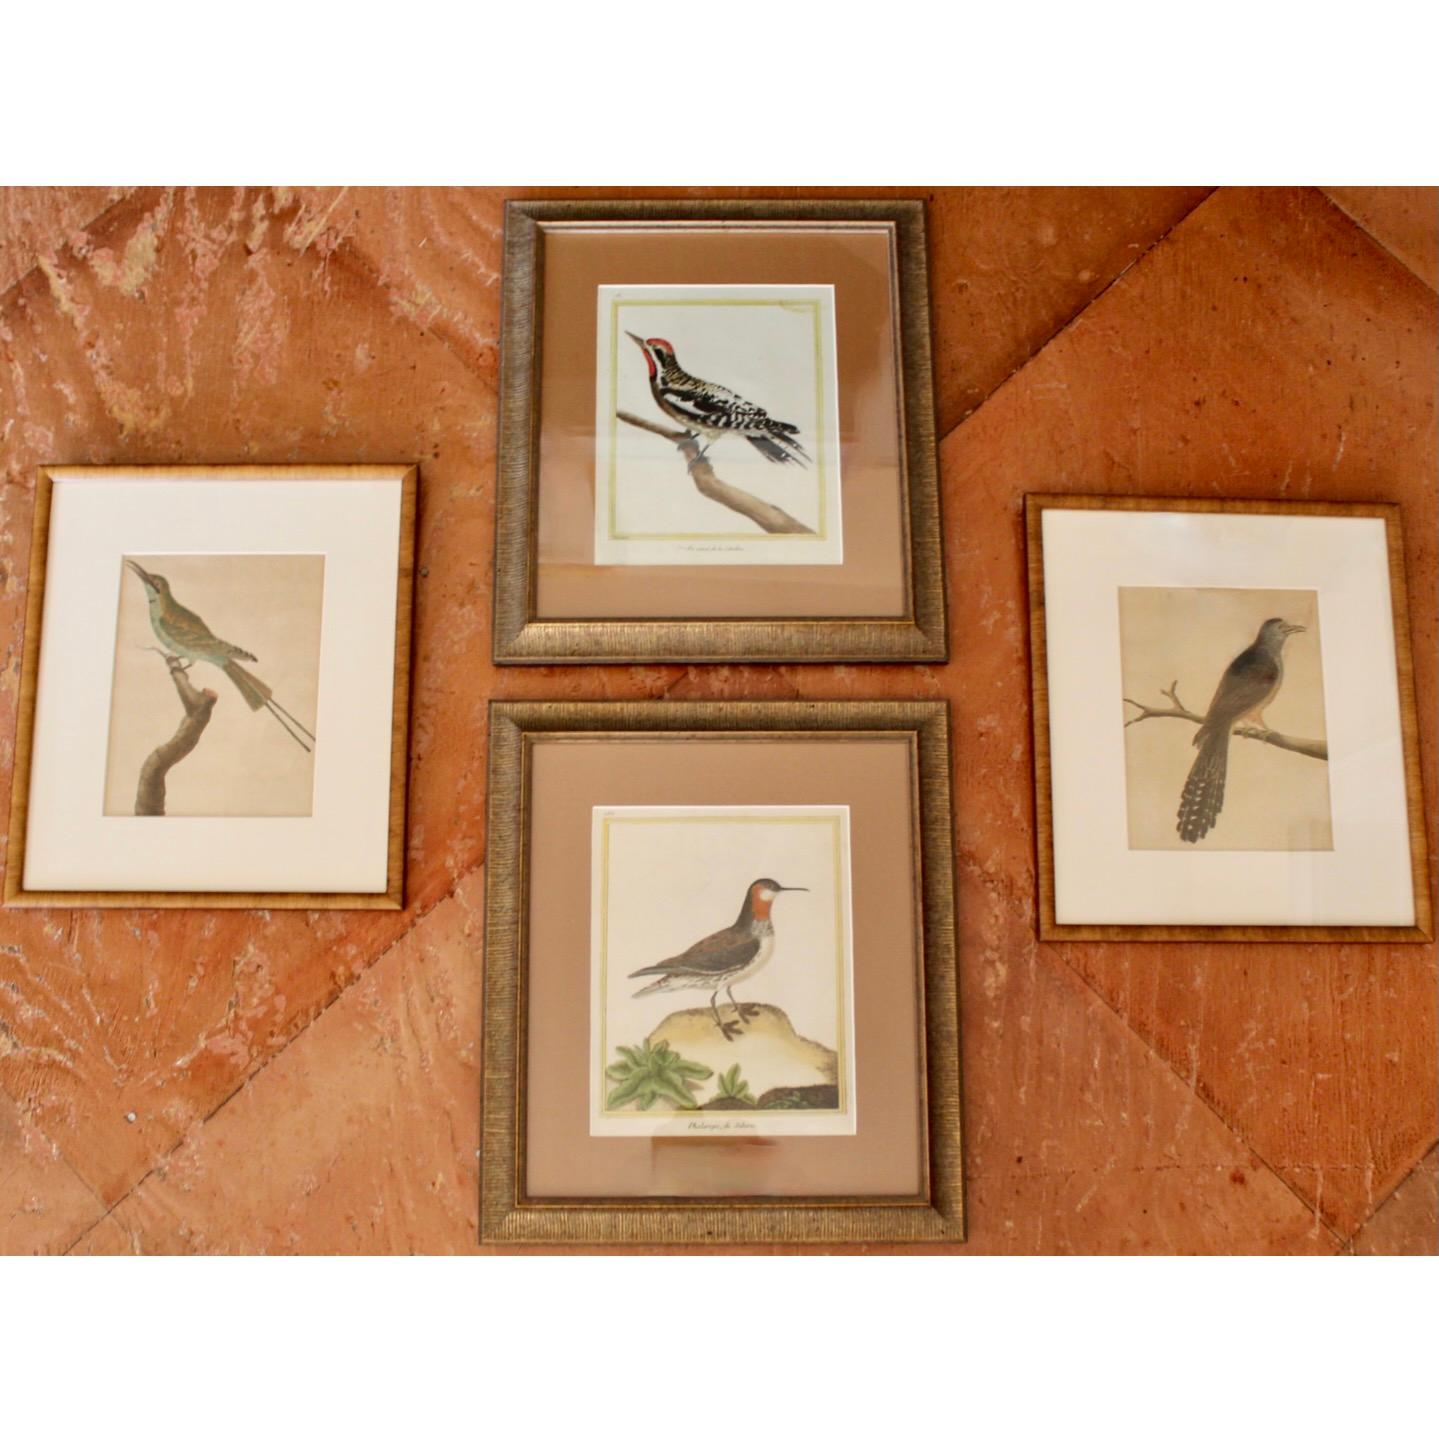 Hand colored in delicate detail, framed and matted original late 18th century engravings, two with labels visible: “Phalarope de Siberie” and “Pie varié de la Caroline.” Martinet (1731-?) was born in Paris and worked independently as well as with